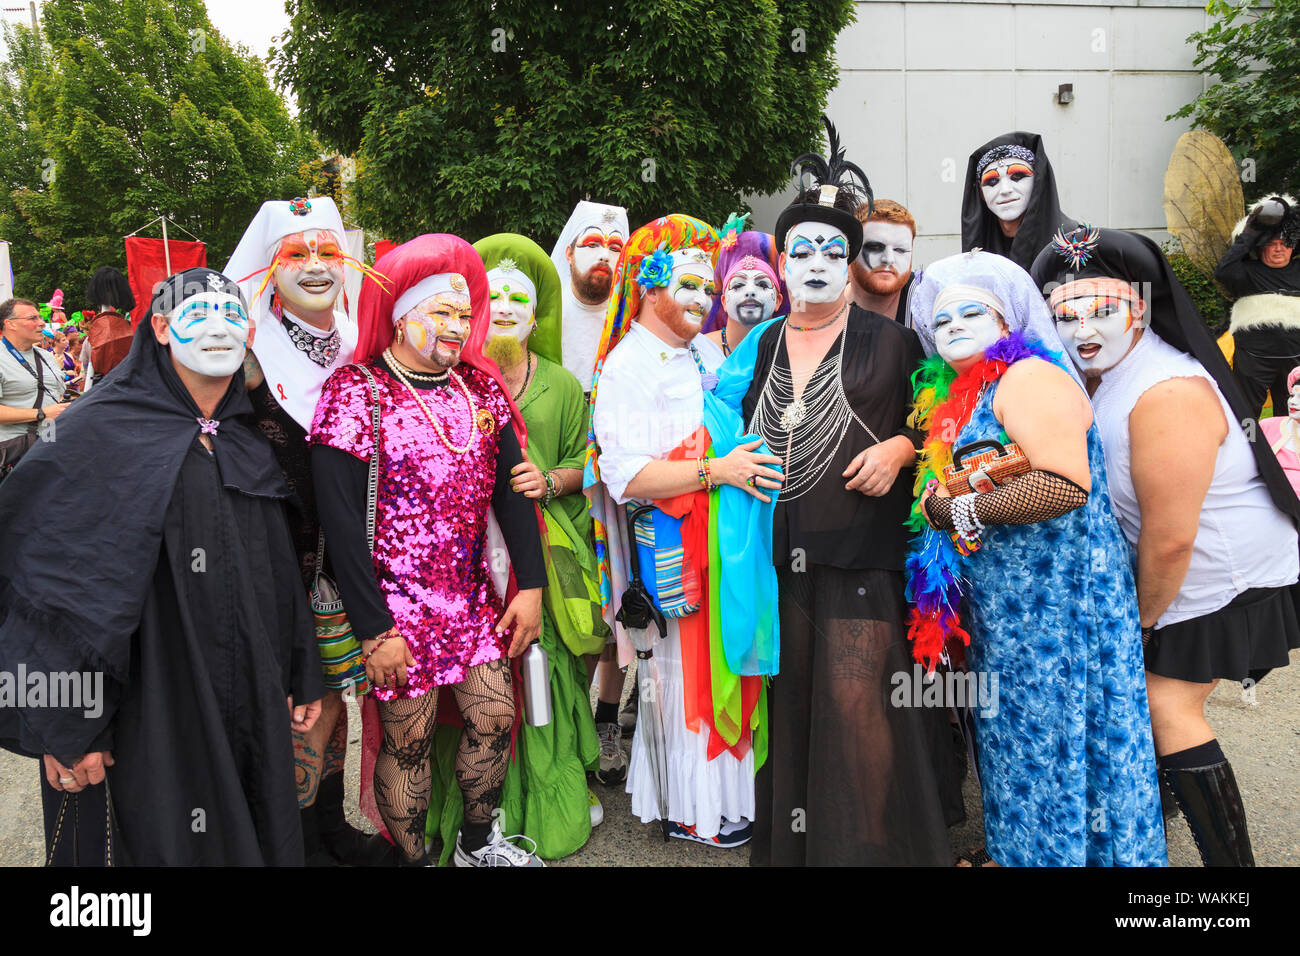 Fremont Solstice Annual Parade, Seattle, Washington State. The 'Sisters of Perpetual Indulgence'. (Editorial Use Only) Stock Photo